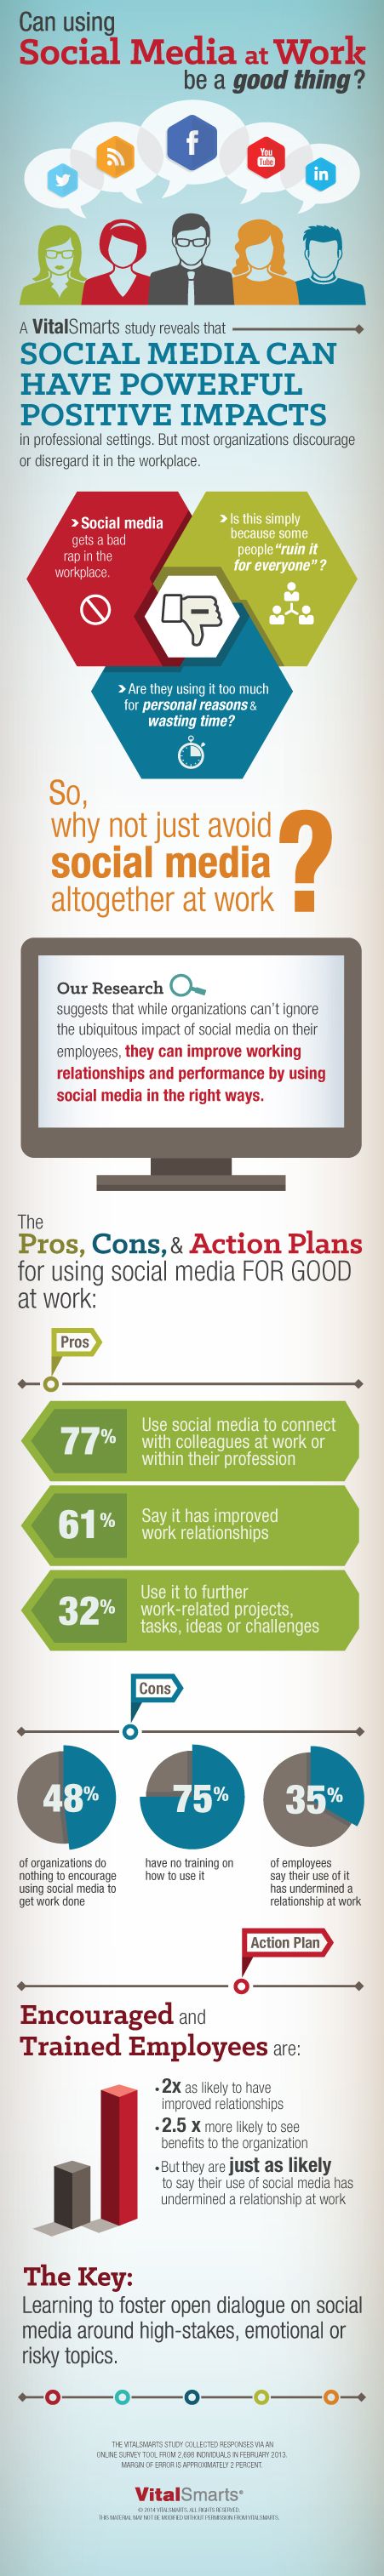 48% of companies don’t encourage social media networking - infographic